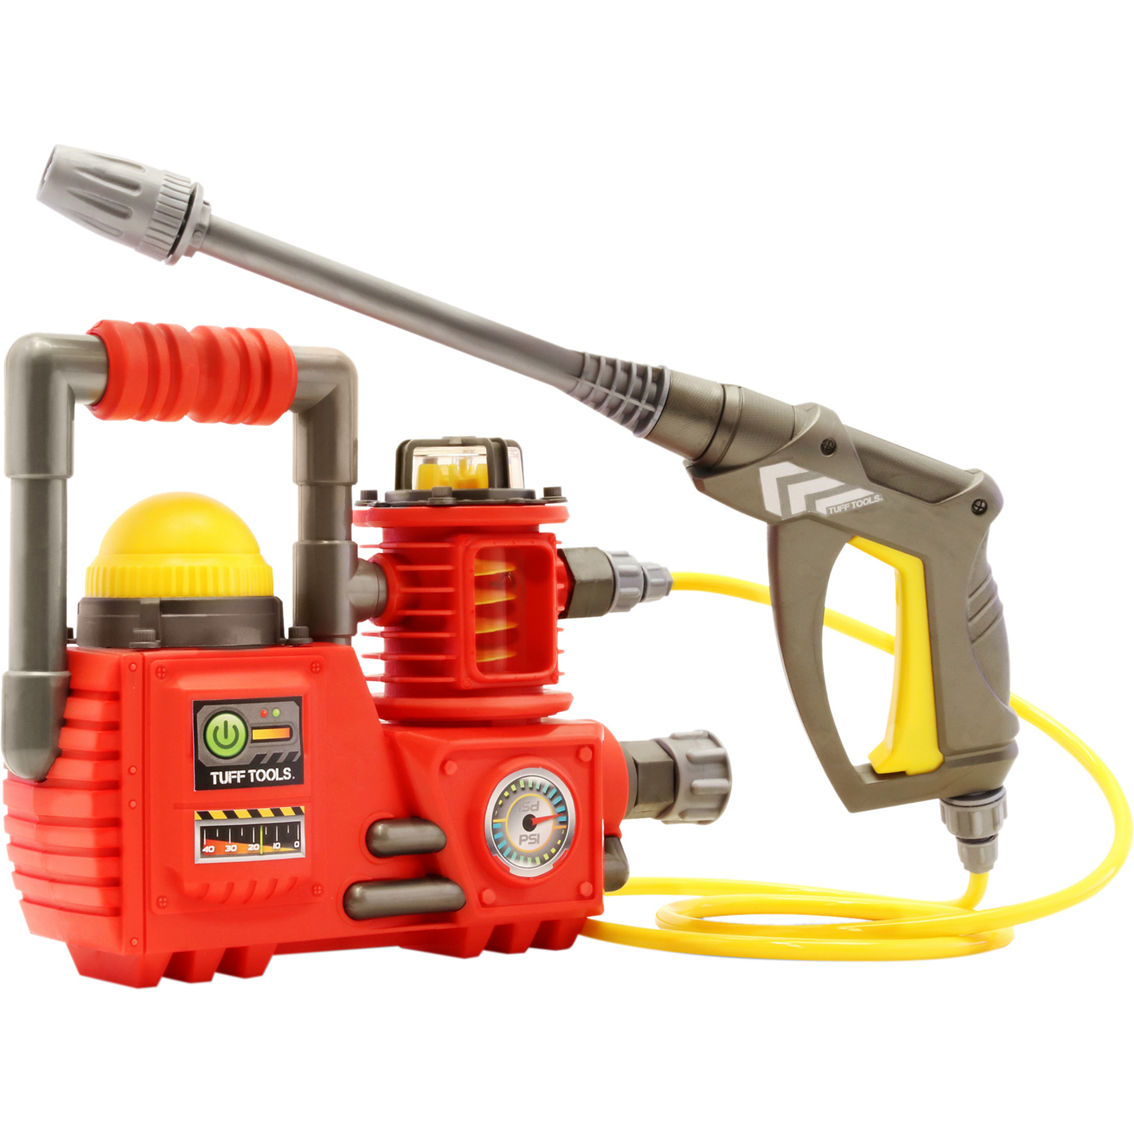 Lanard Tuff Tools: Power Washer - Hose Connecting, Sprays Water, Ages 3+ - Image 2 of 4